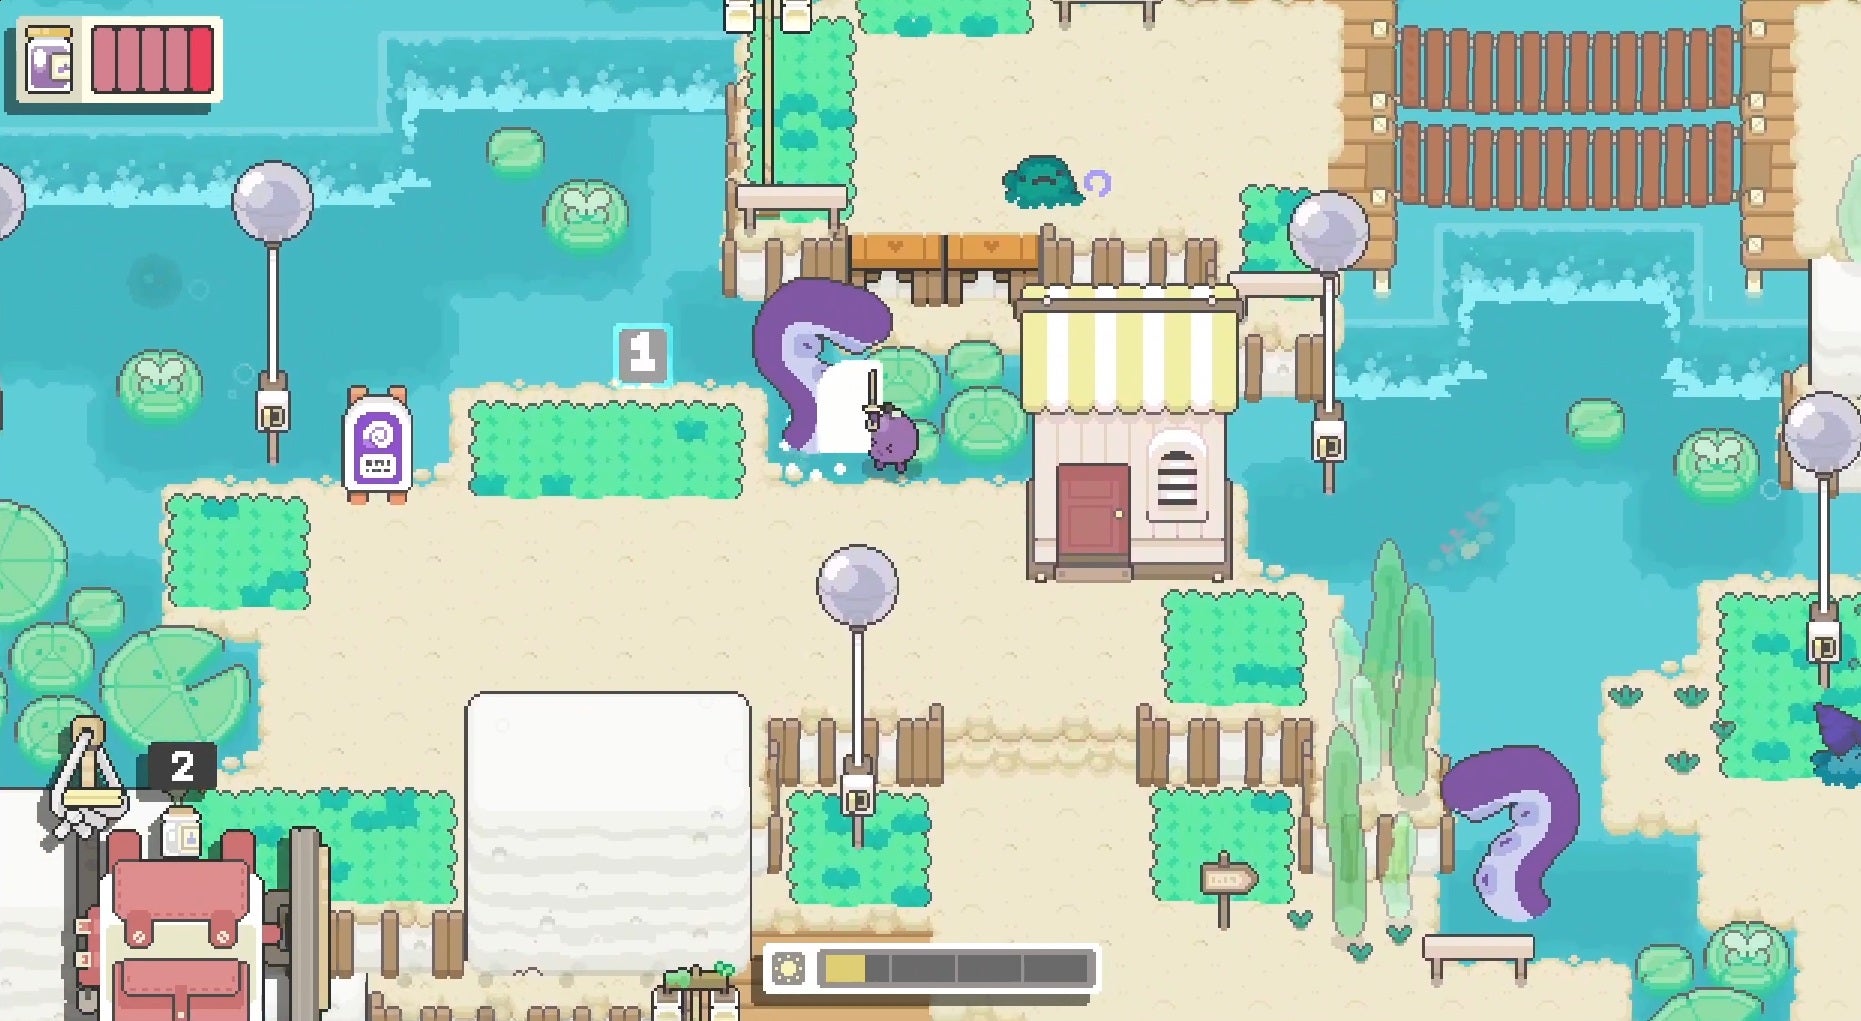 Garden Story - Concord the grape swings a small sword at a large purple tentacle coming out of the water in the cute, pastel village.